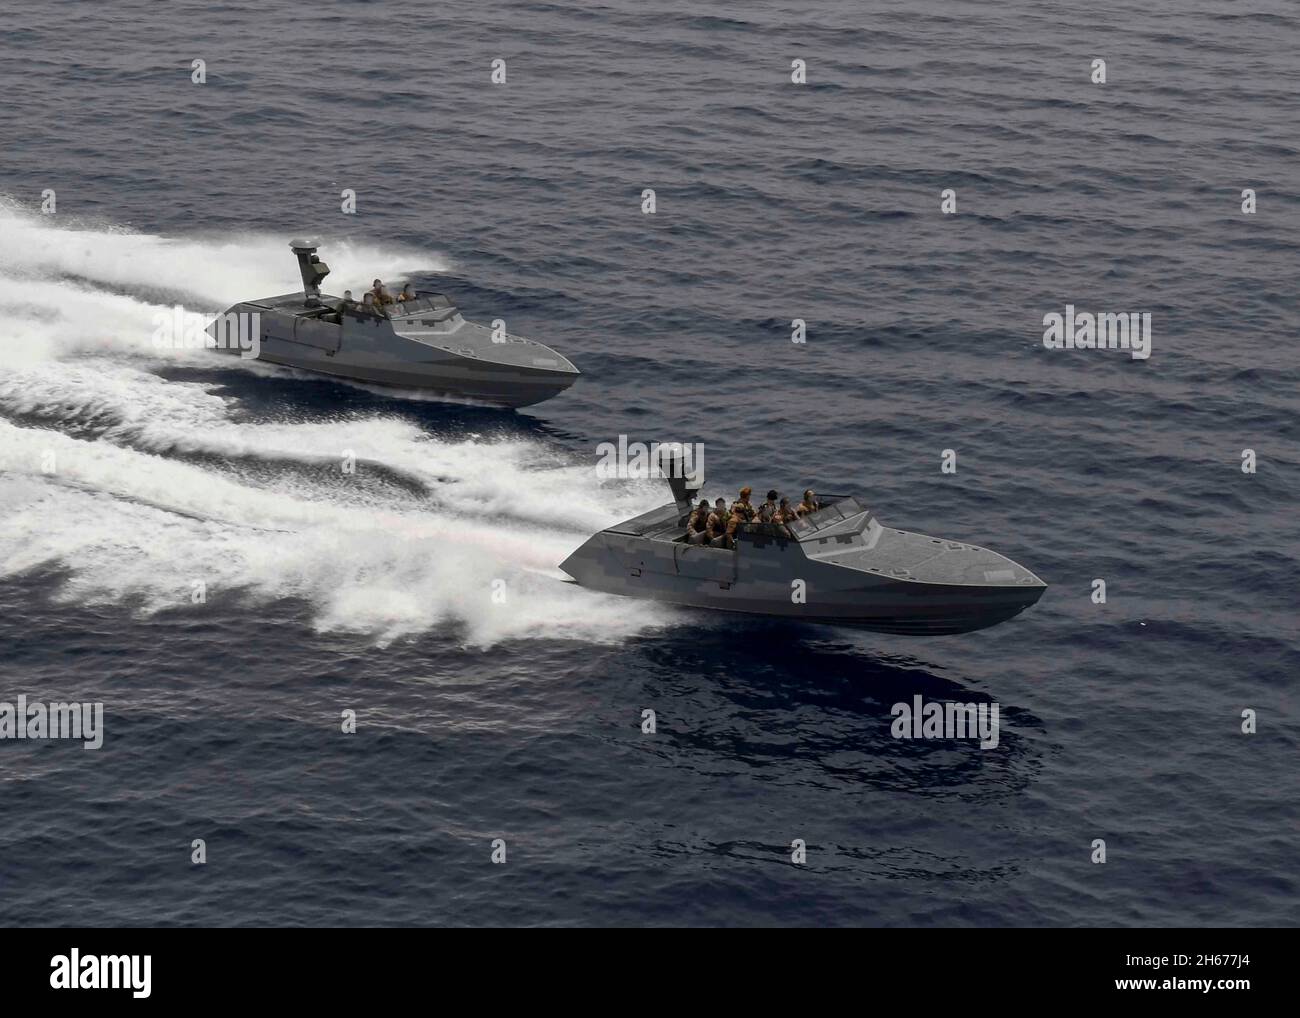 Mediterranean Sea, United States. 26 May, 2021. U.S. Navy SEALS combatant craft assault crafts, assigned to the Special Boat Team Twenty, speed alongside the Expeditionary Sea Base USS Hershel Woody Williams May 26, 2021 in the Mediterranean Sea. Credit: MC2 Eric Coffer/U.S. Navy/Alamy Live News Stock Photo